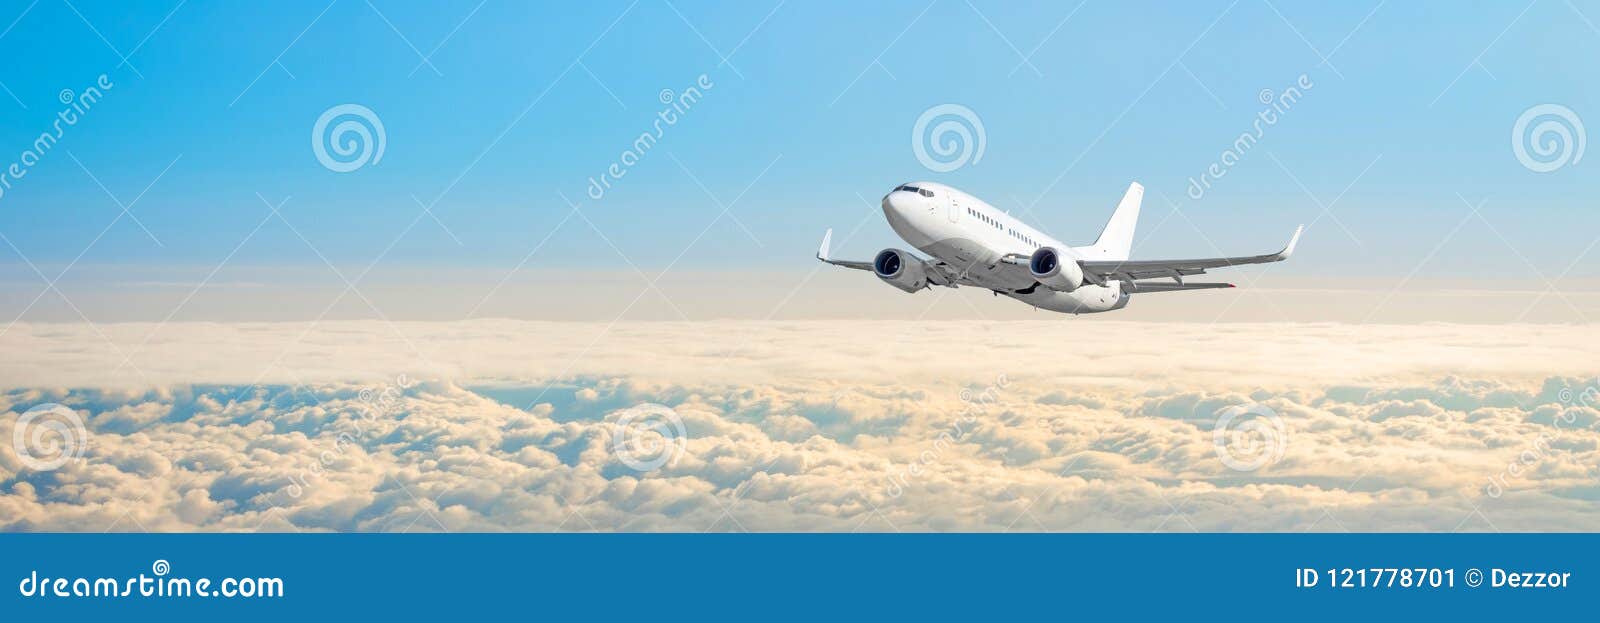 passenger aircraft cloudscape with white airplane is flying in the daytime sky overcast, panorama view.